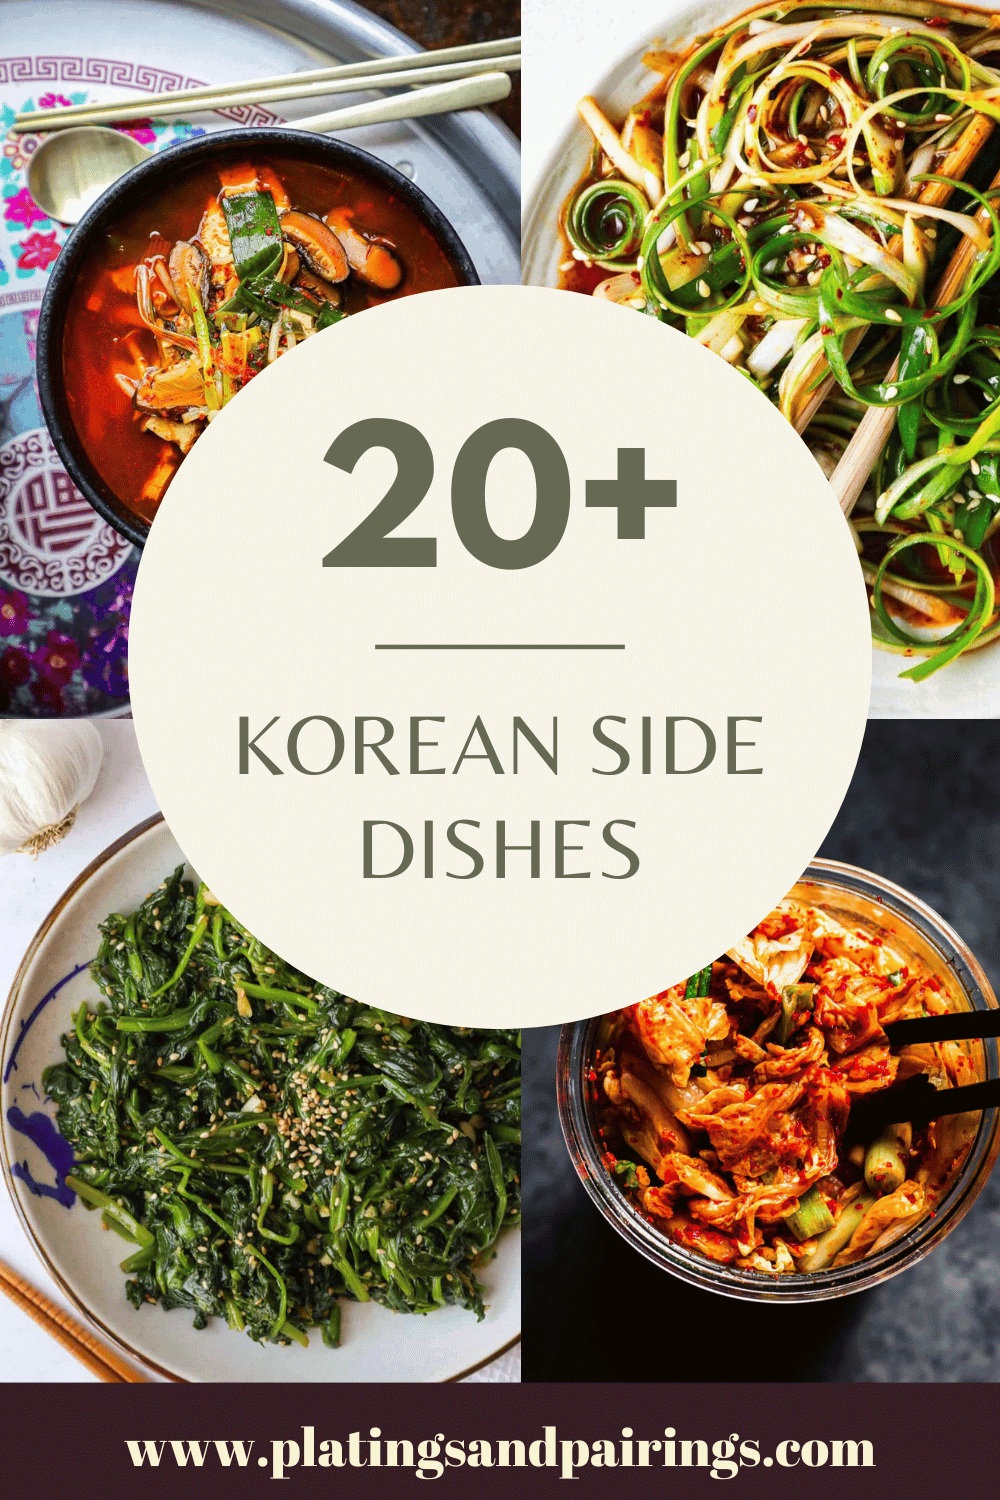 Collage of Korean side dishes with text overlay.